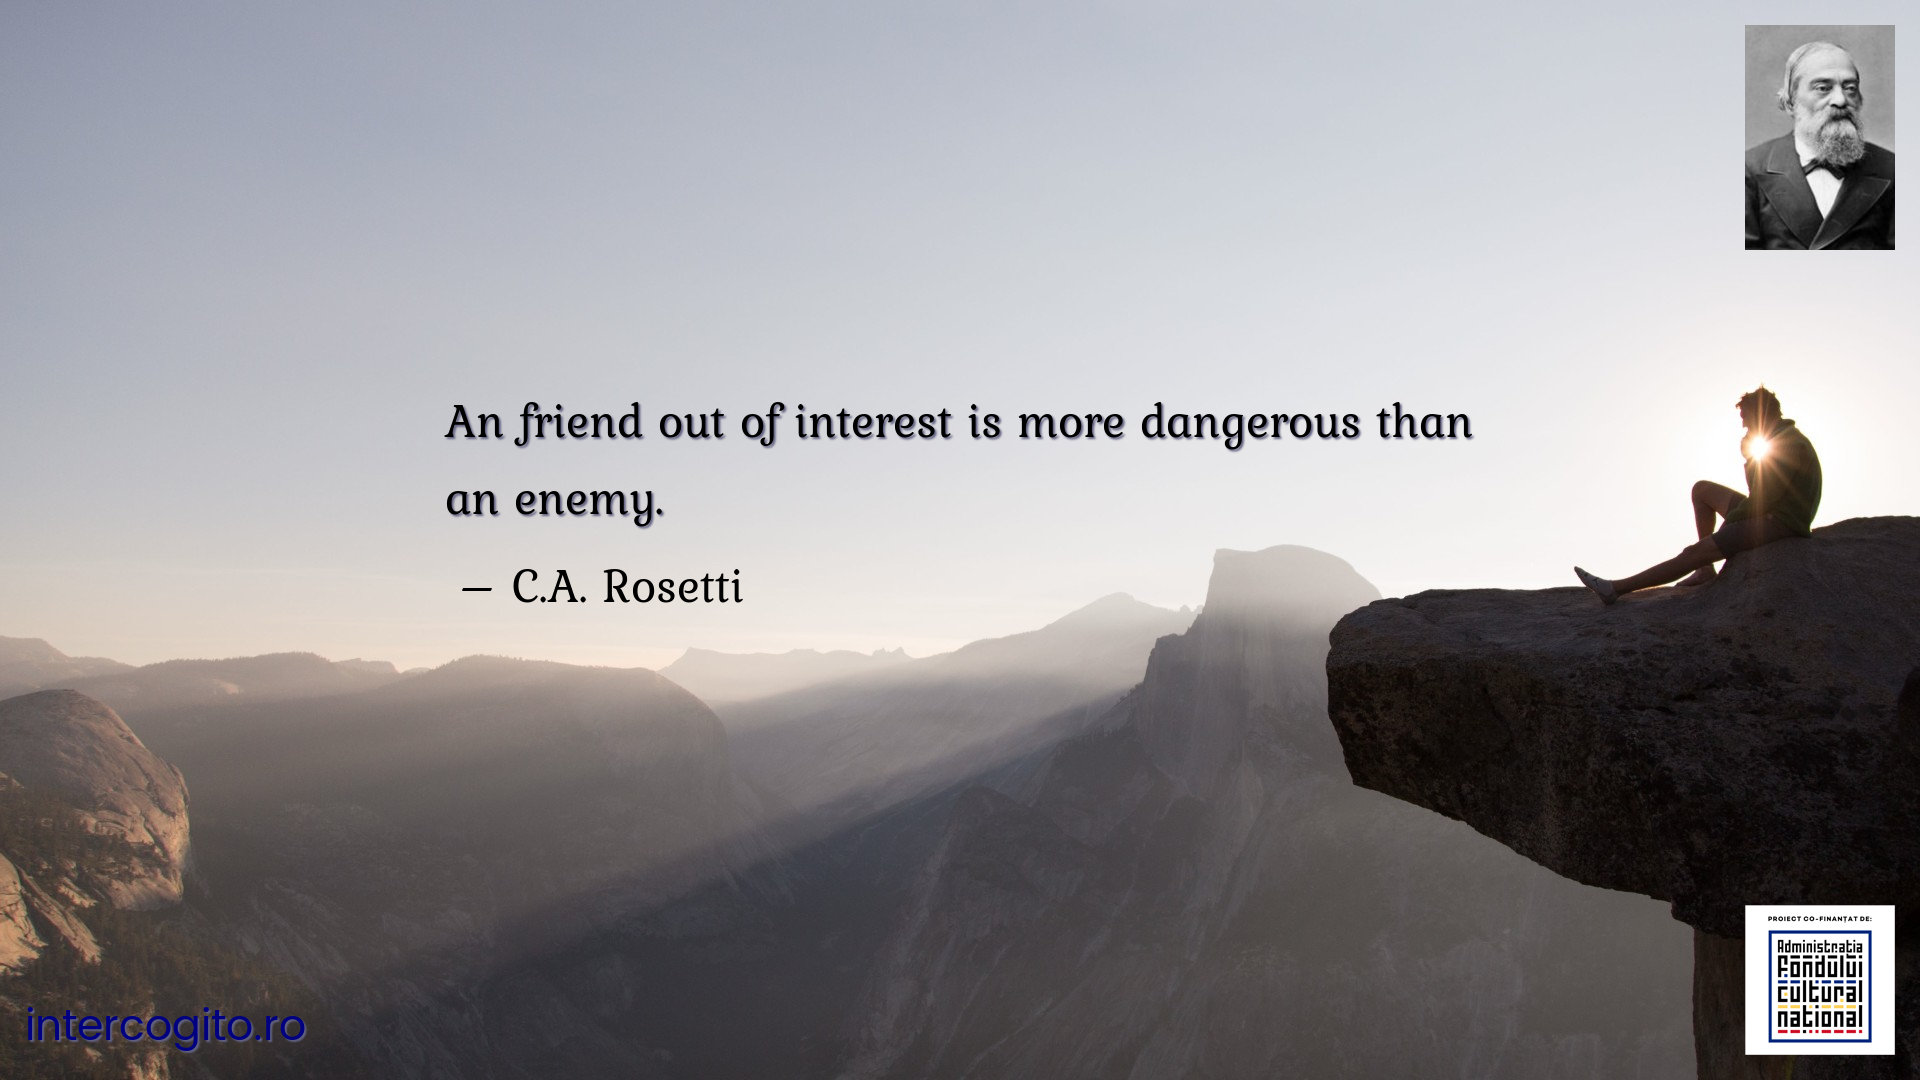 An friend out of interest is more dangerous than an enemy.